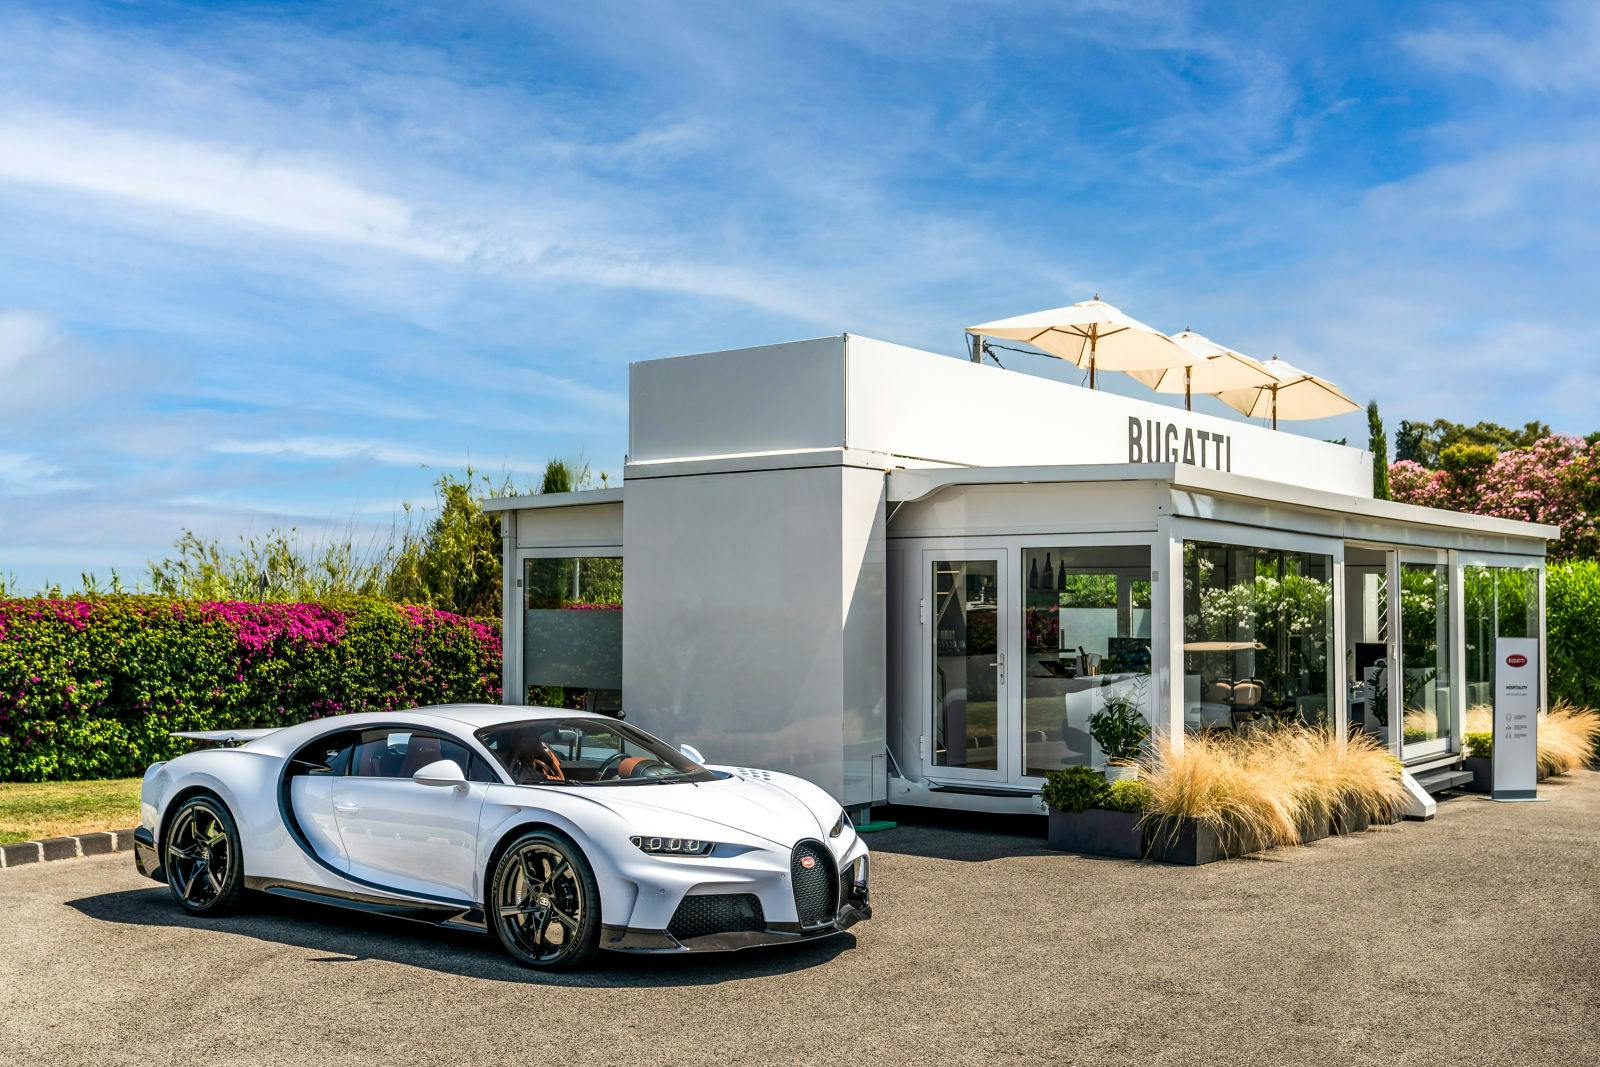 The Chiron Super Sport, which recently made its debut, will for the time being only be presented statically.